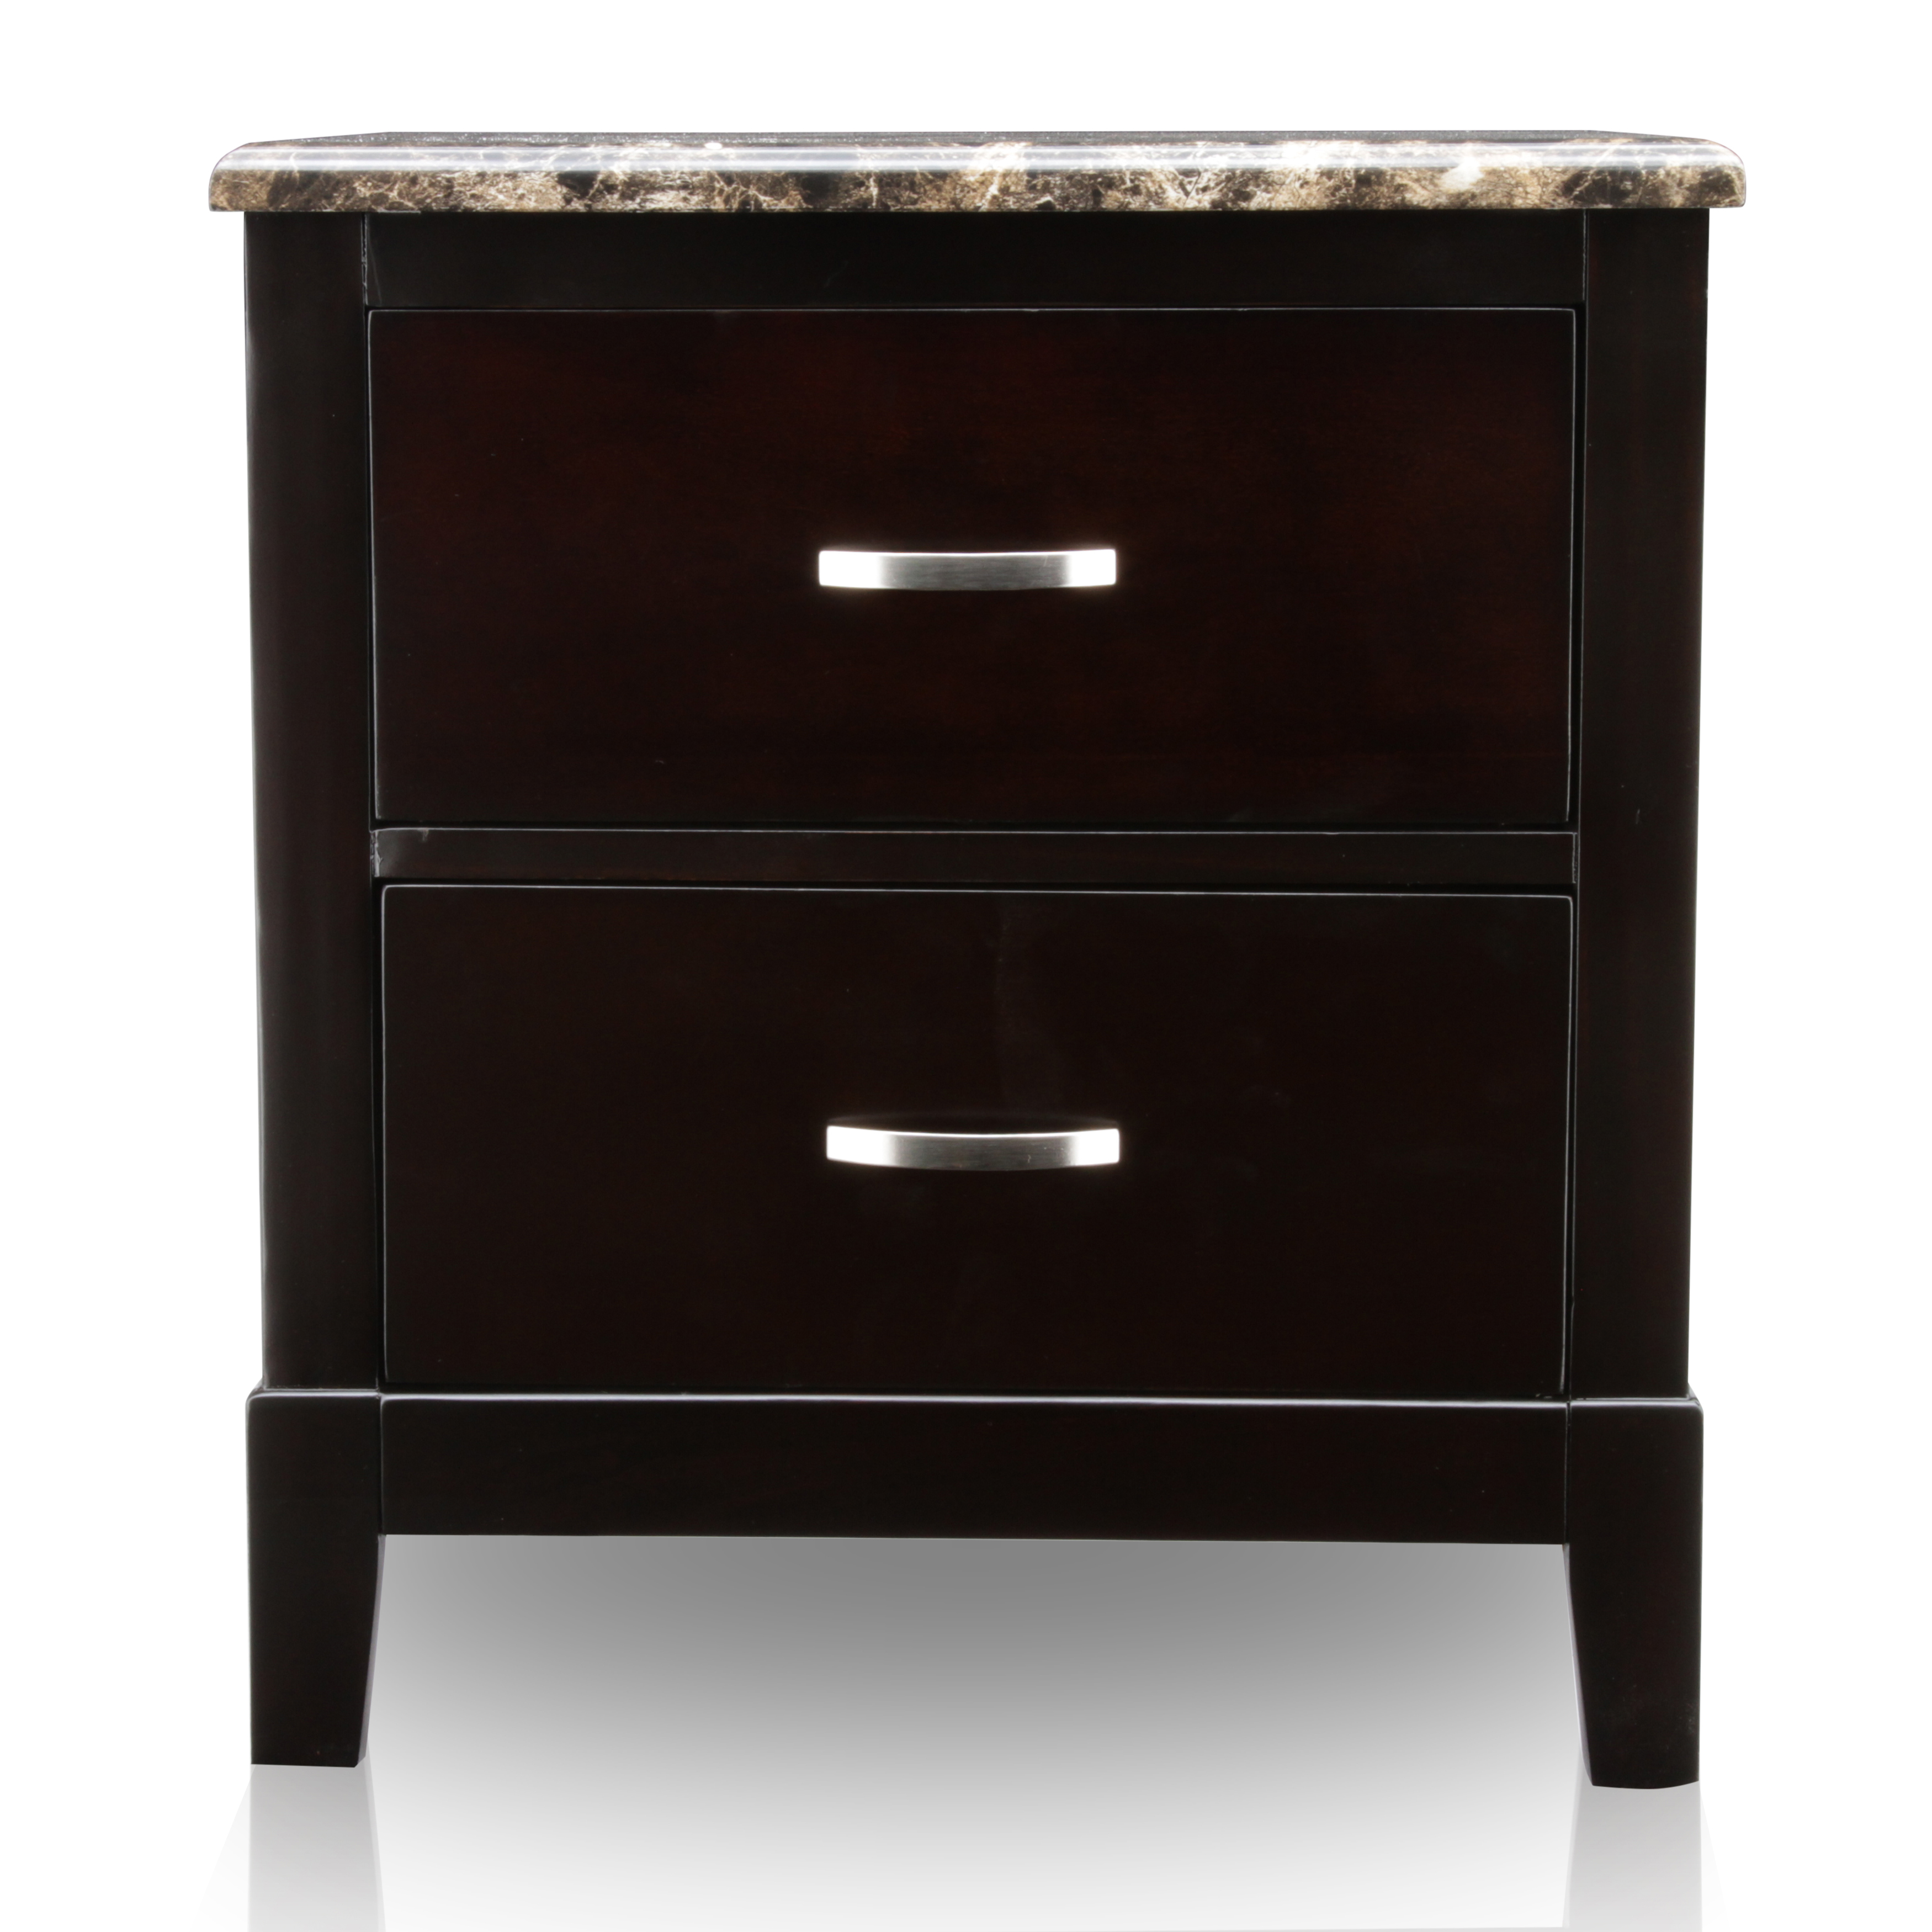 Furniture of America Polak Dark Cherry 2-Drawer Nightstand with Faux Marble Top